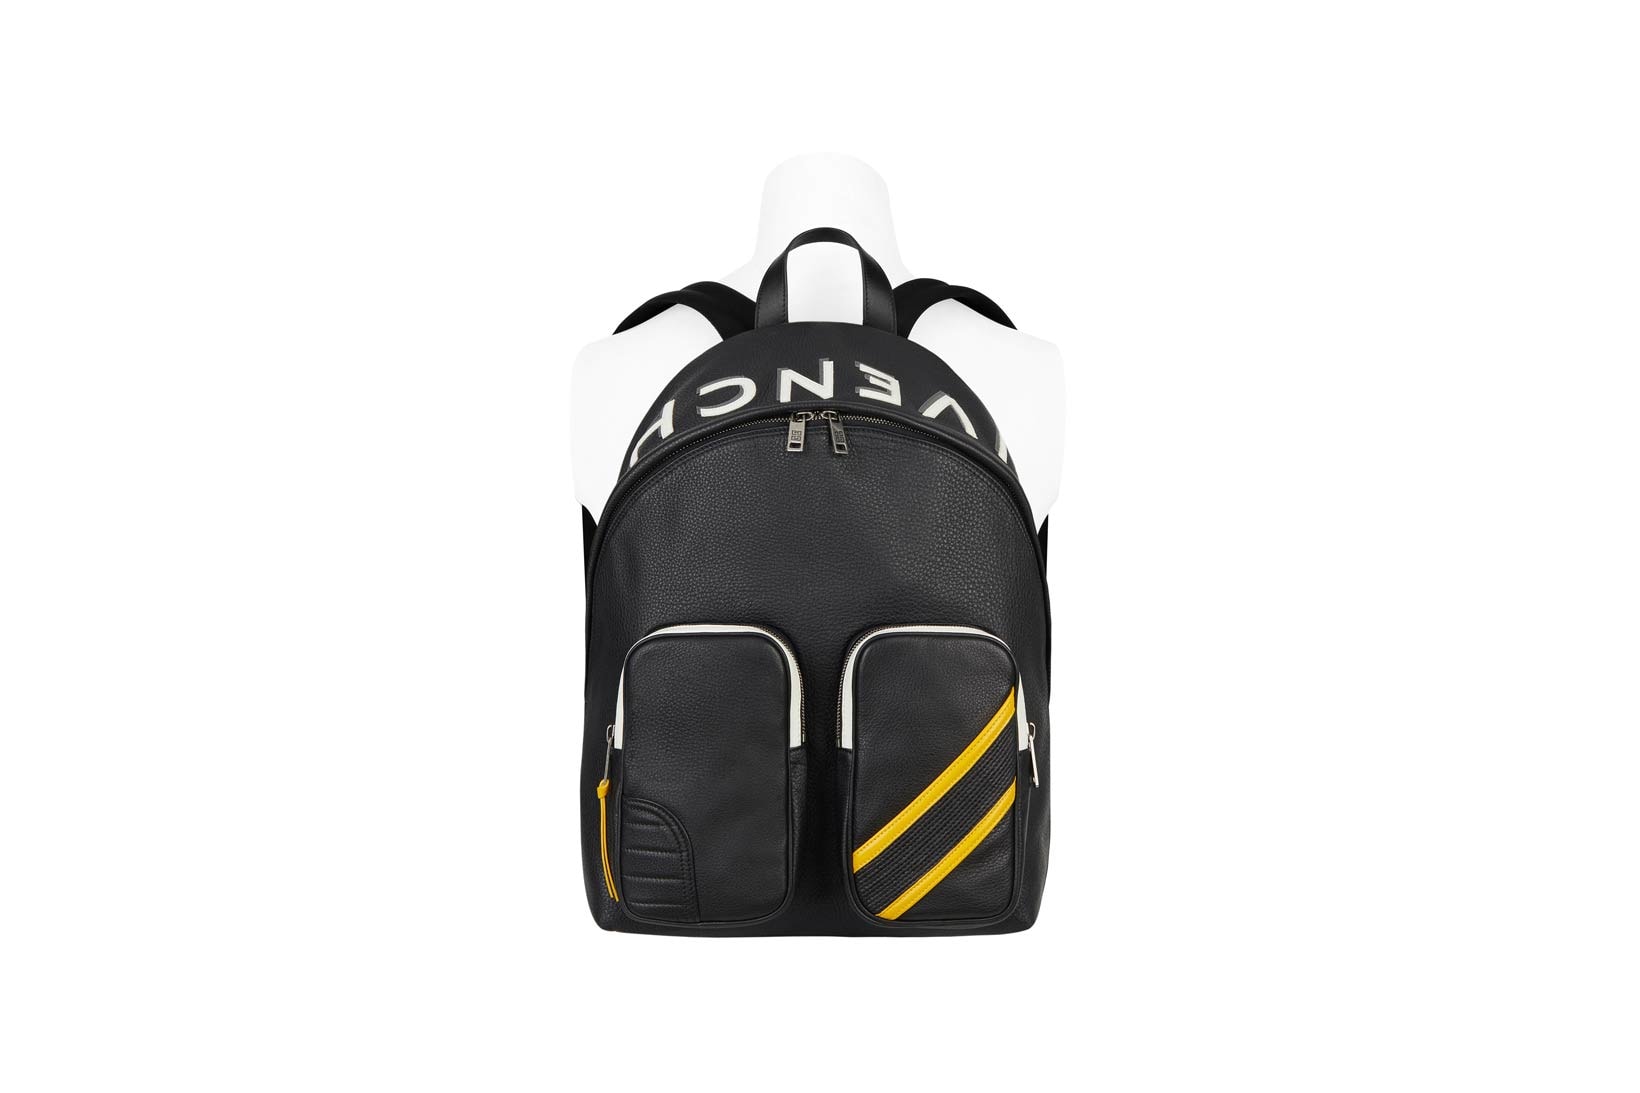 Givenchy Pre-Fall 2018 Motocross Backpack Black White